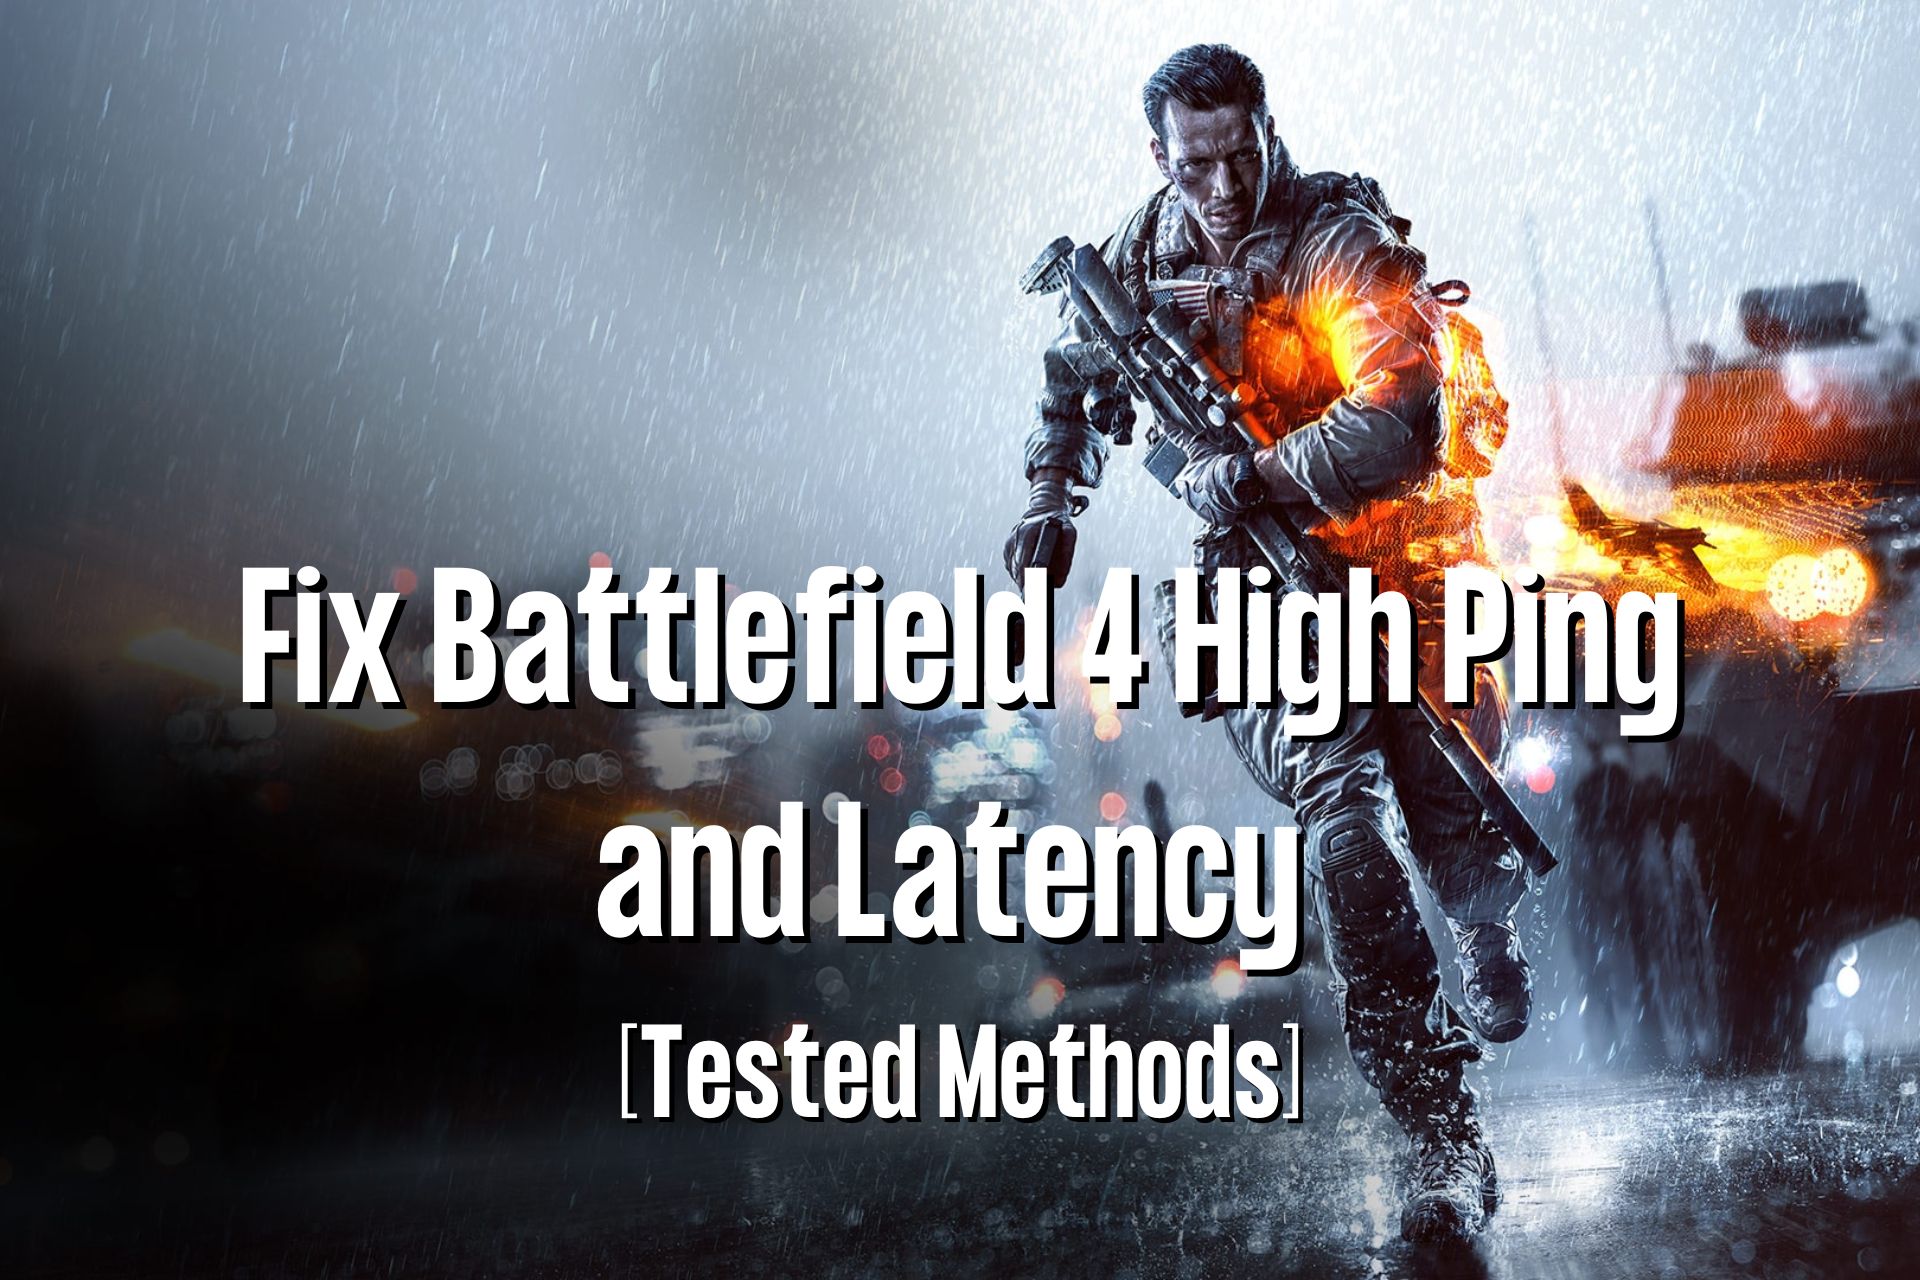 6 Tested Ways to Fix Battlefield 4 High Ping & Latency